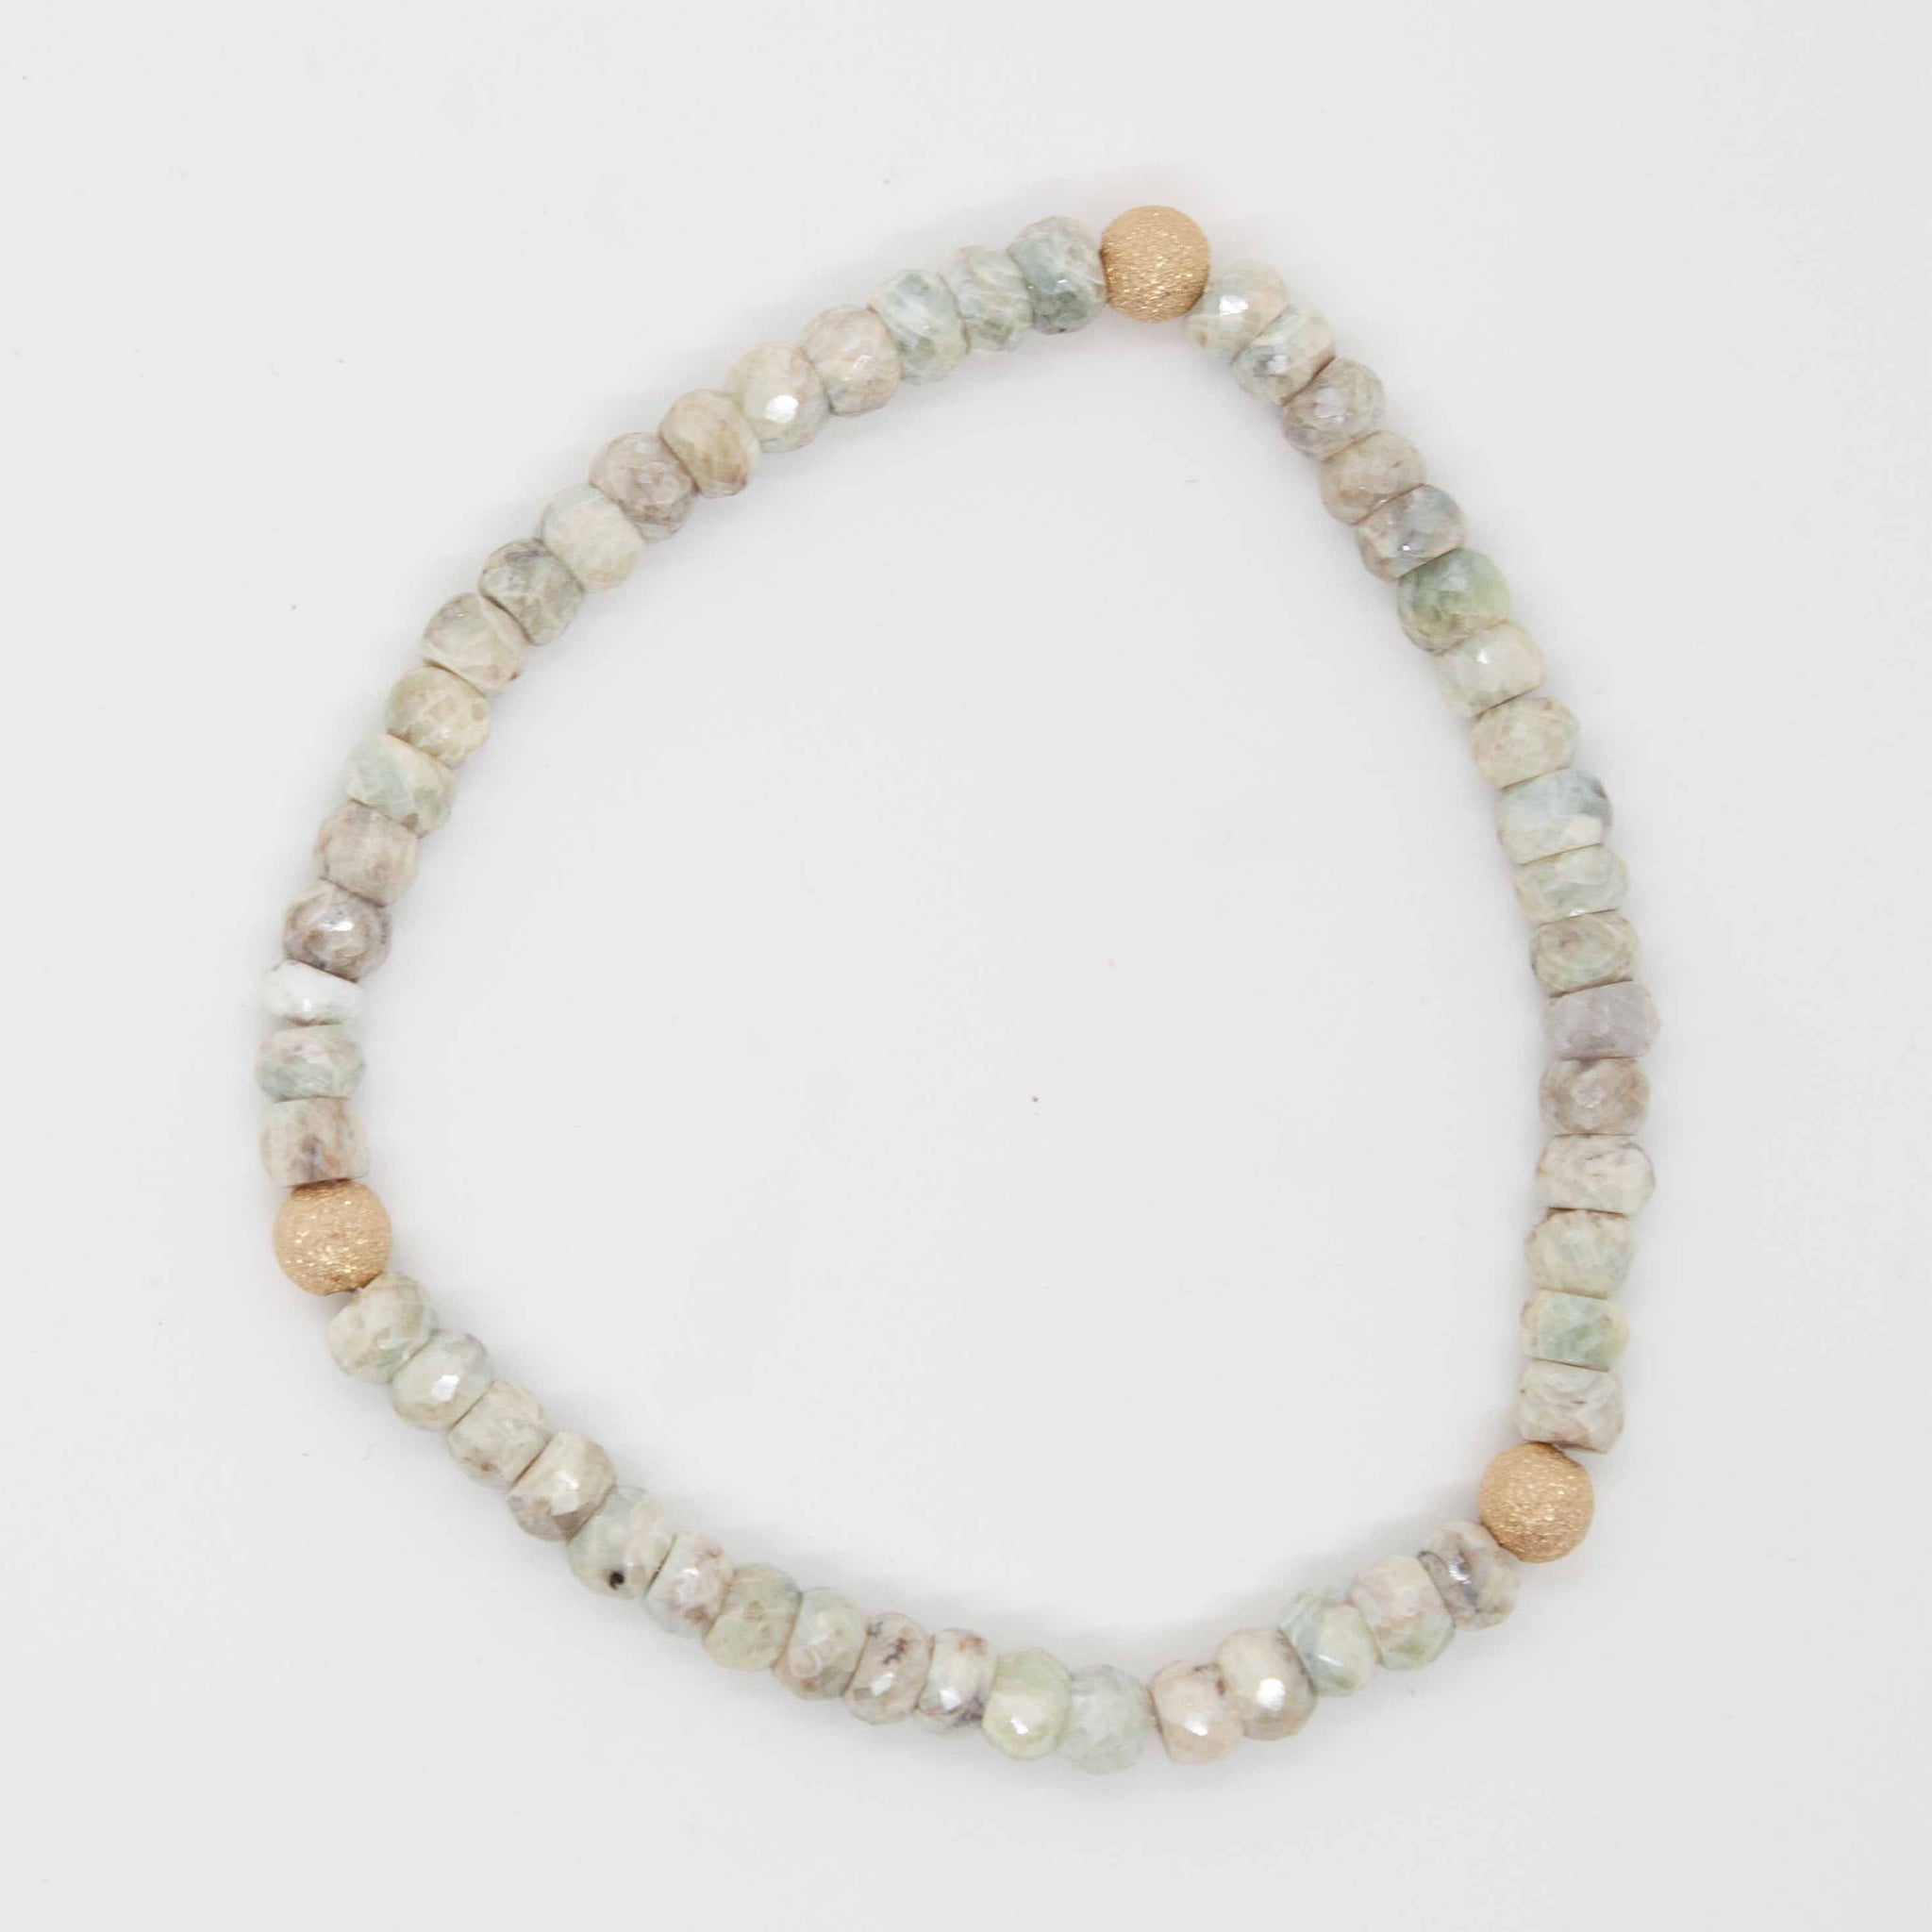 7 inch beaded silverite stretchy bracelet with 14kt gold filled accent beads.